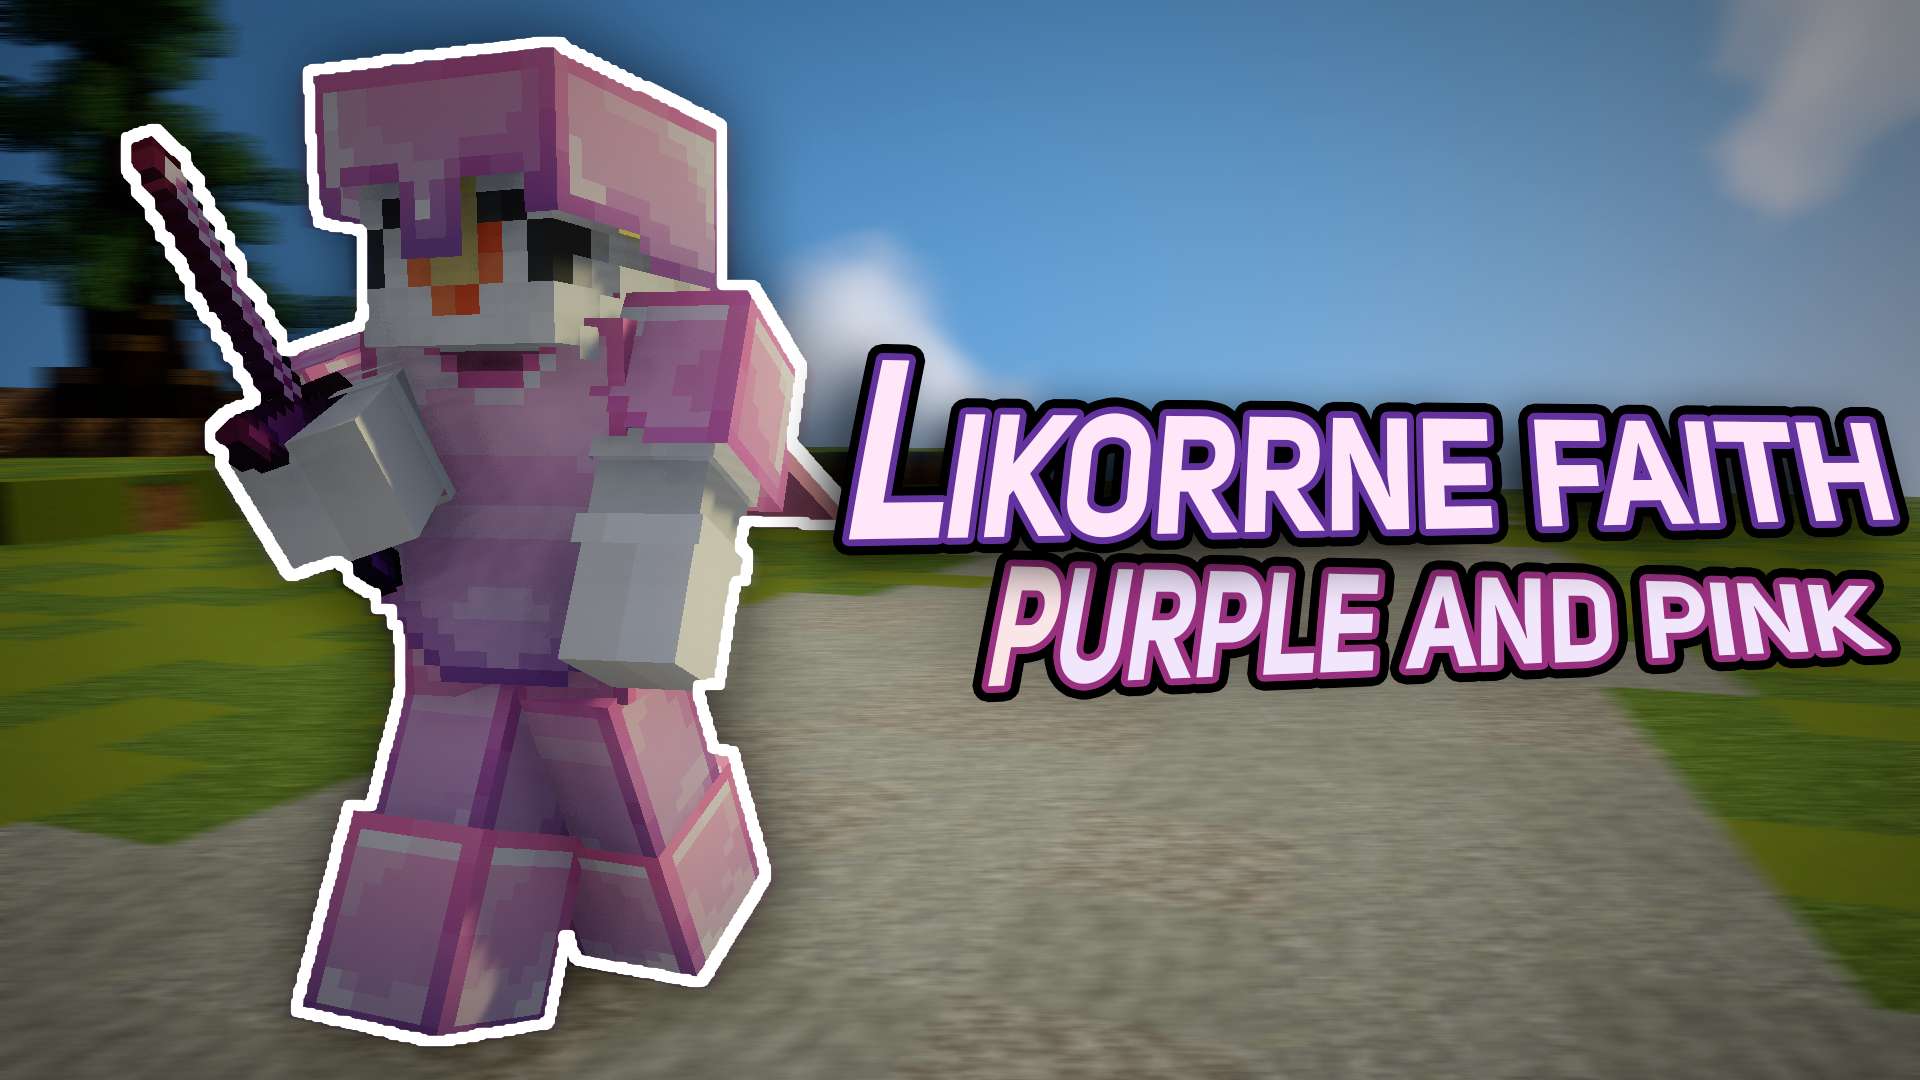 Likorrne Faith (Purple and pink) 32 by Likorrne on PvPRP